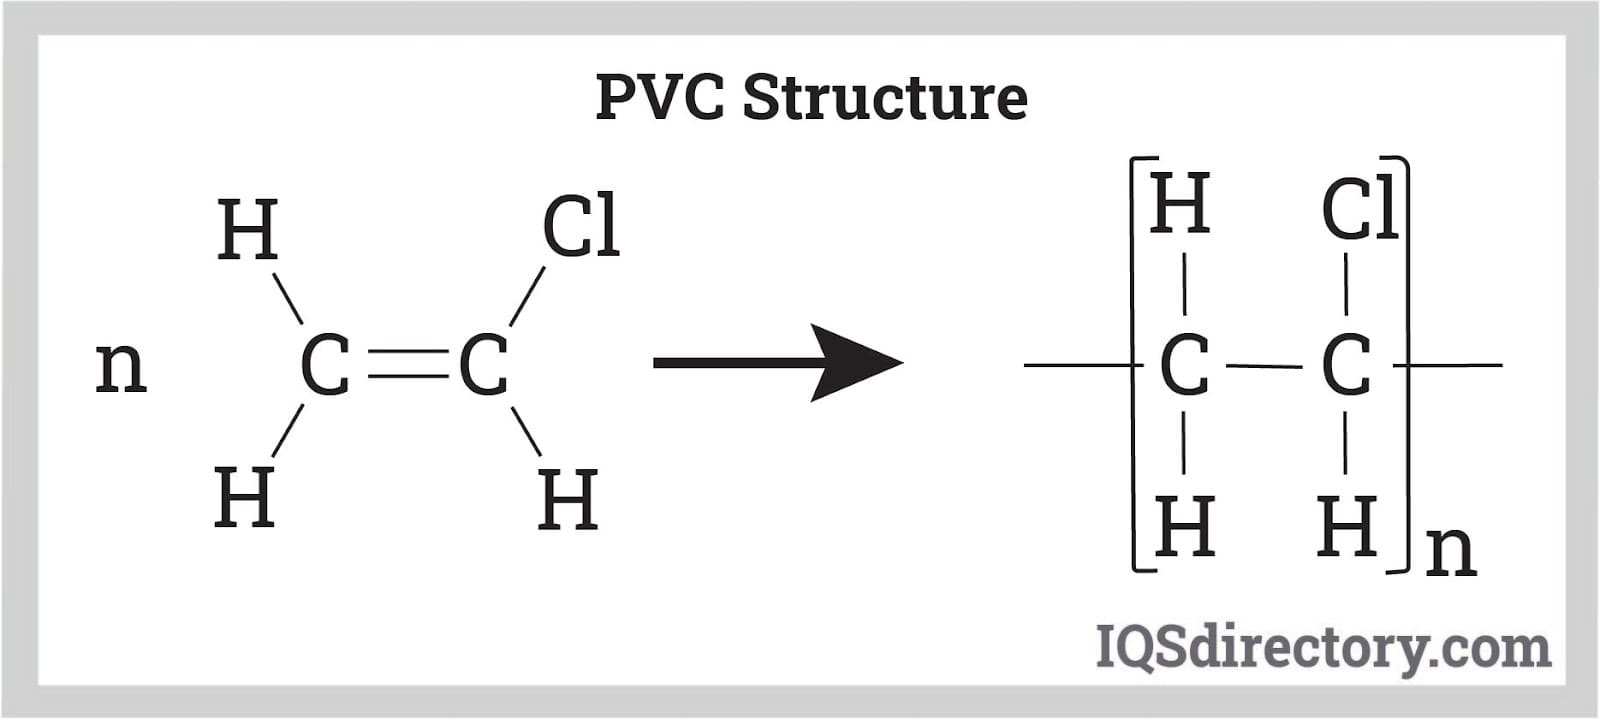 Difference Between PVC and Lead-Free PVC - Petron Thermoplast